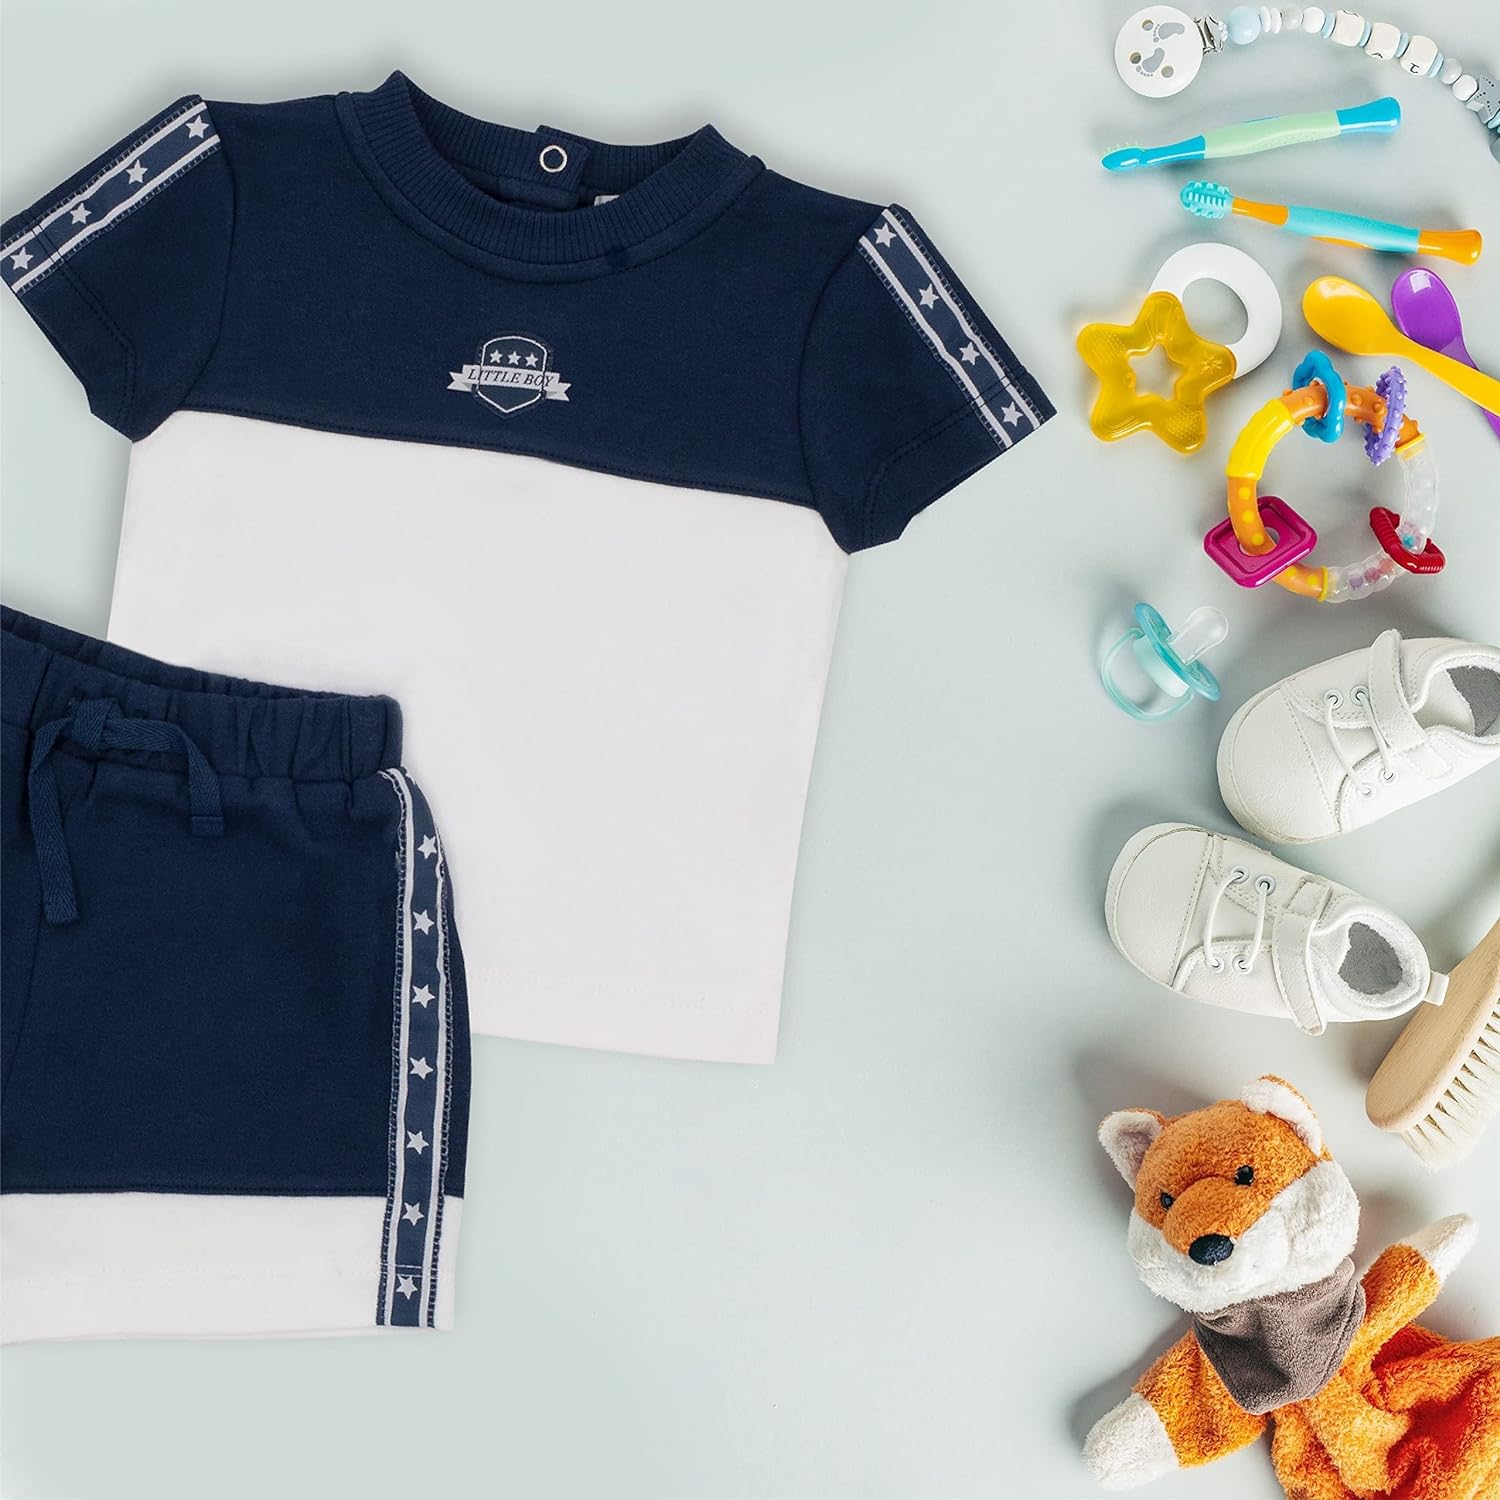 MOON 100% Cotton Polo T-shirt & pull on shorts 3-6M Blue - Navy Sports